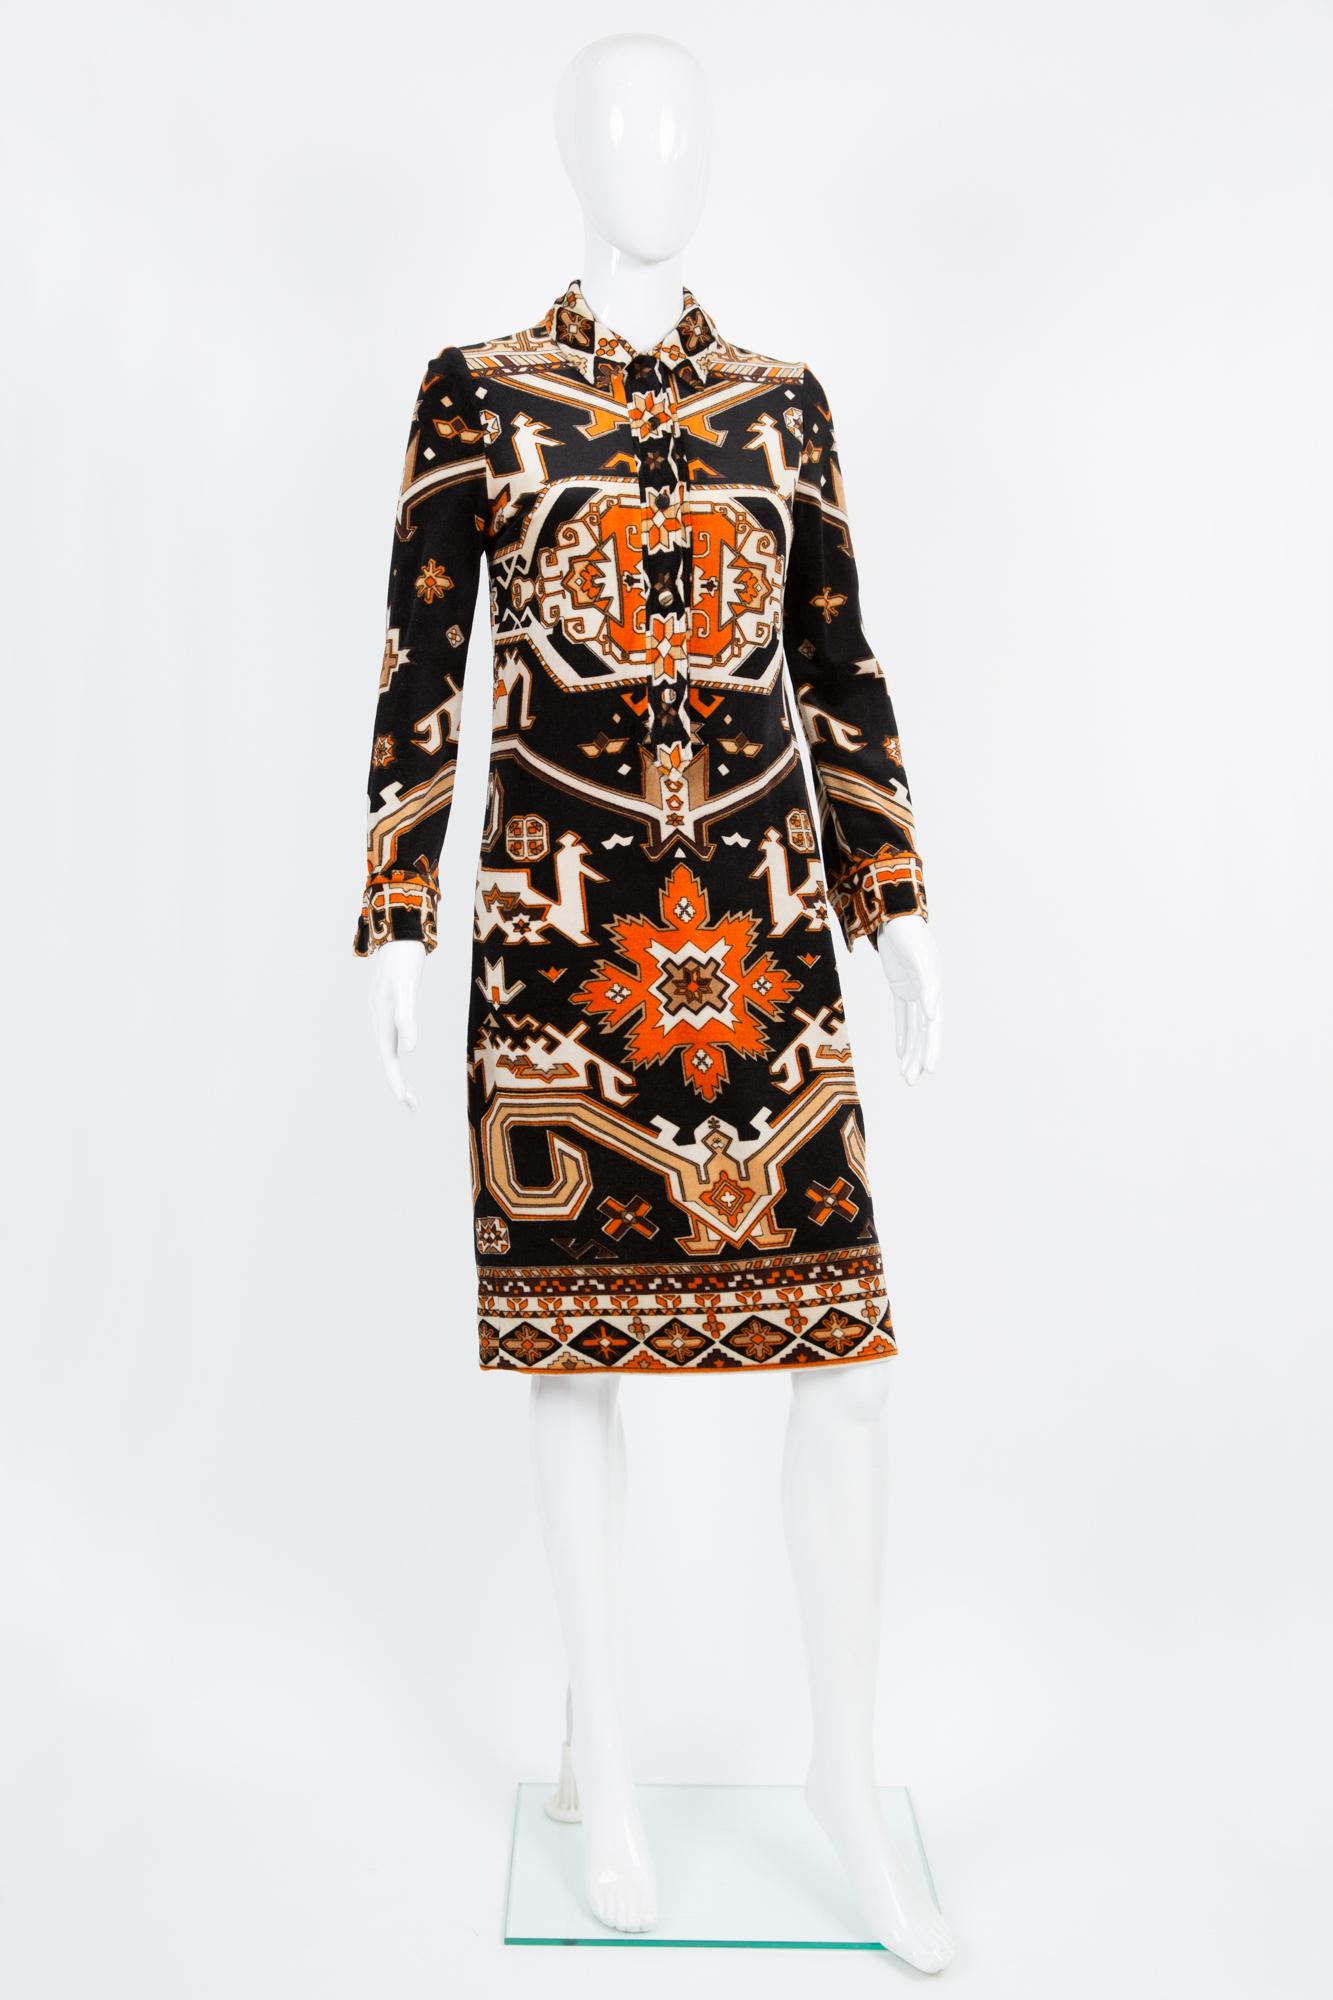 1960s Leonard velveteen dress featuring a Kilim print, long sleeves, covered buttons.
Estimated size 36fr/ US4/ UK8
We guarantee you will receive this gorgeous item as described and showed on photos. (please enlarge images to see all details on